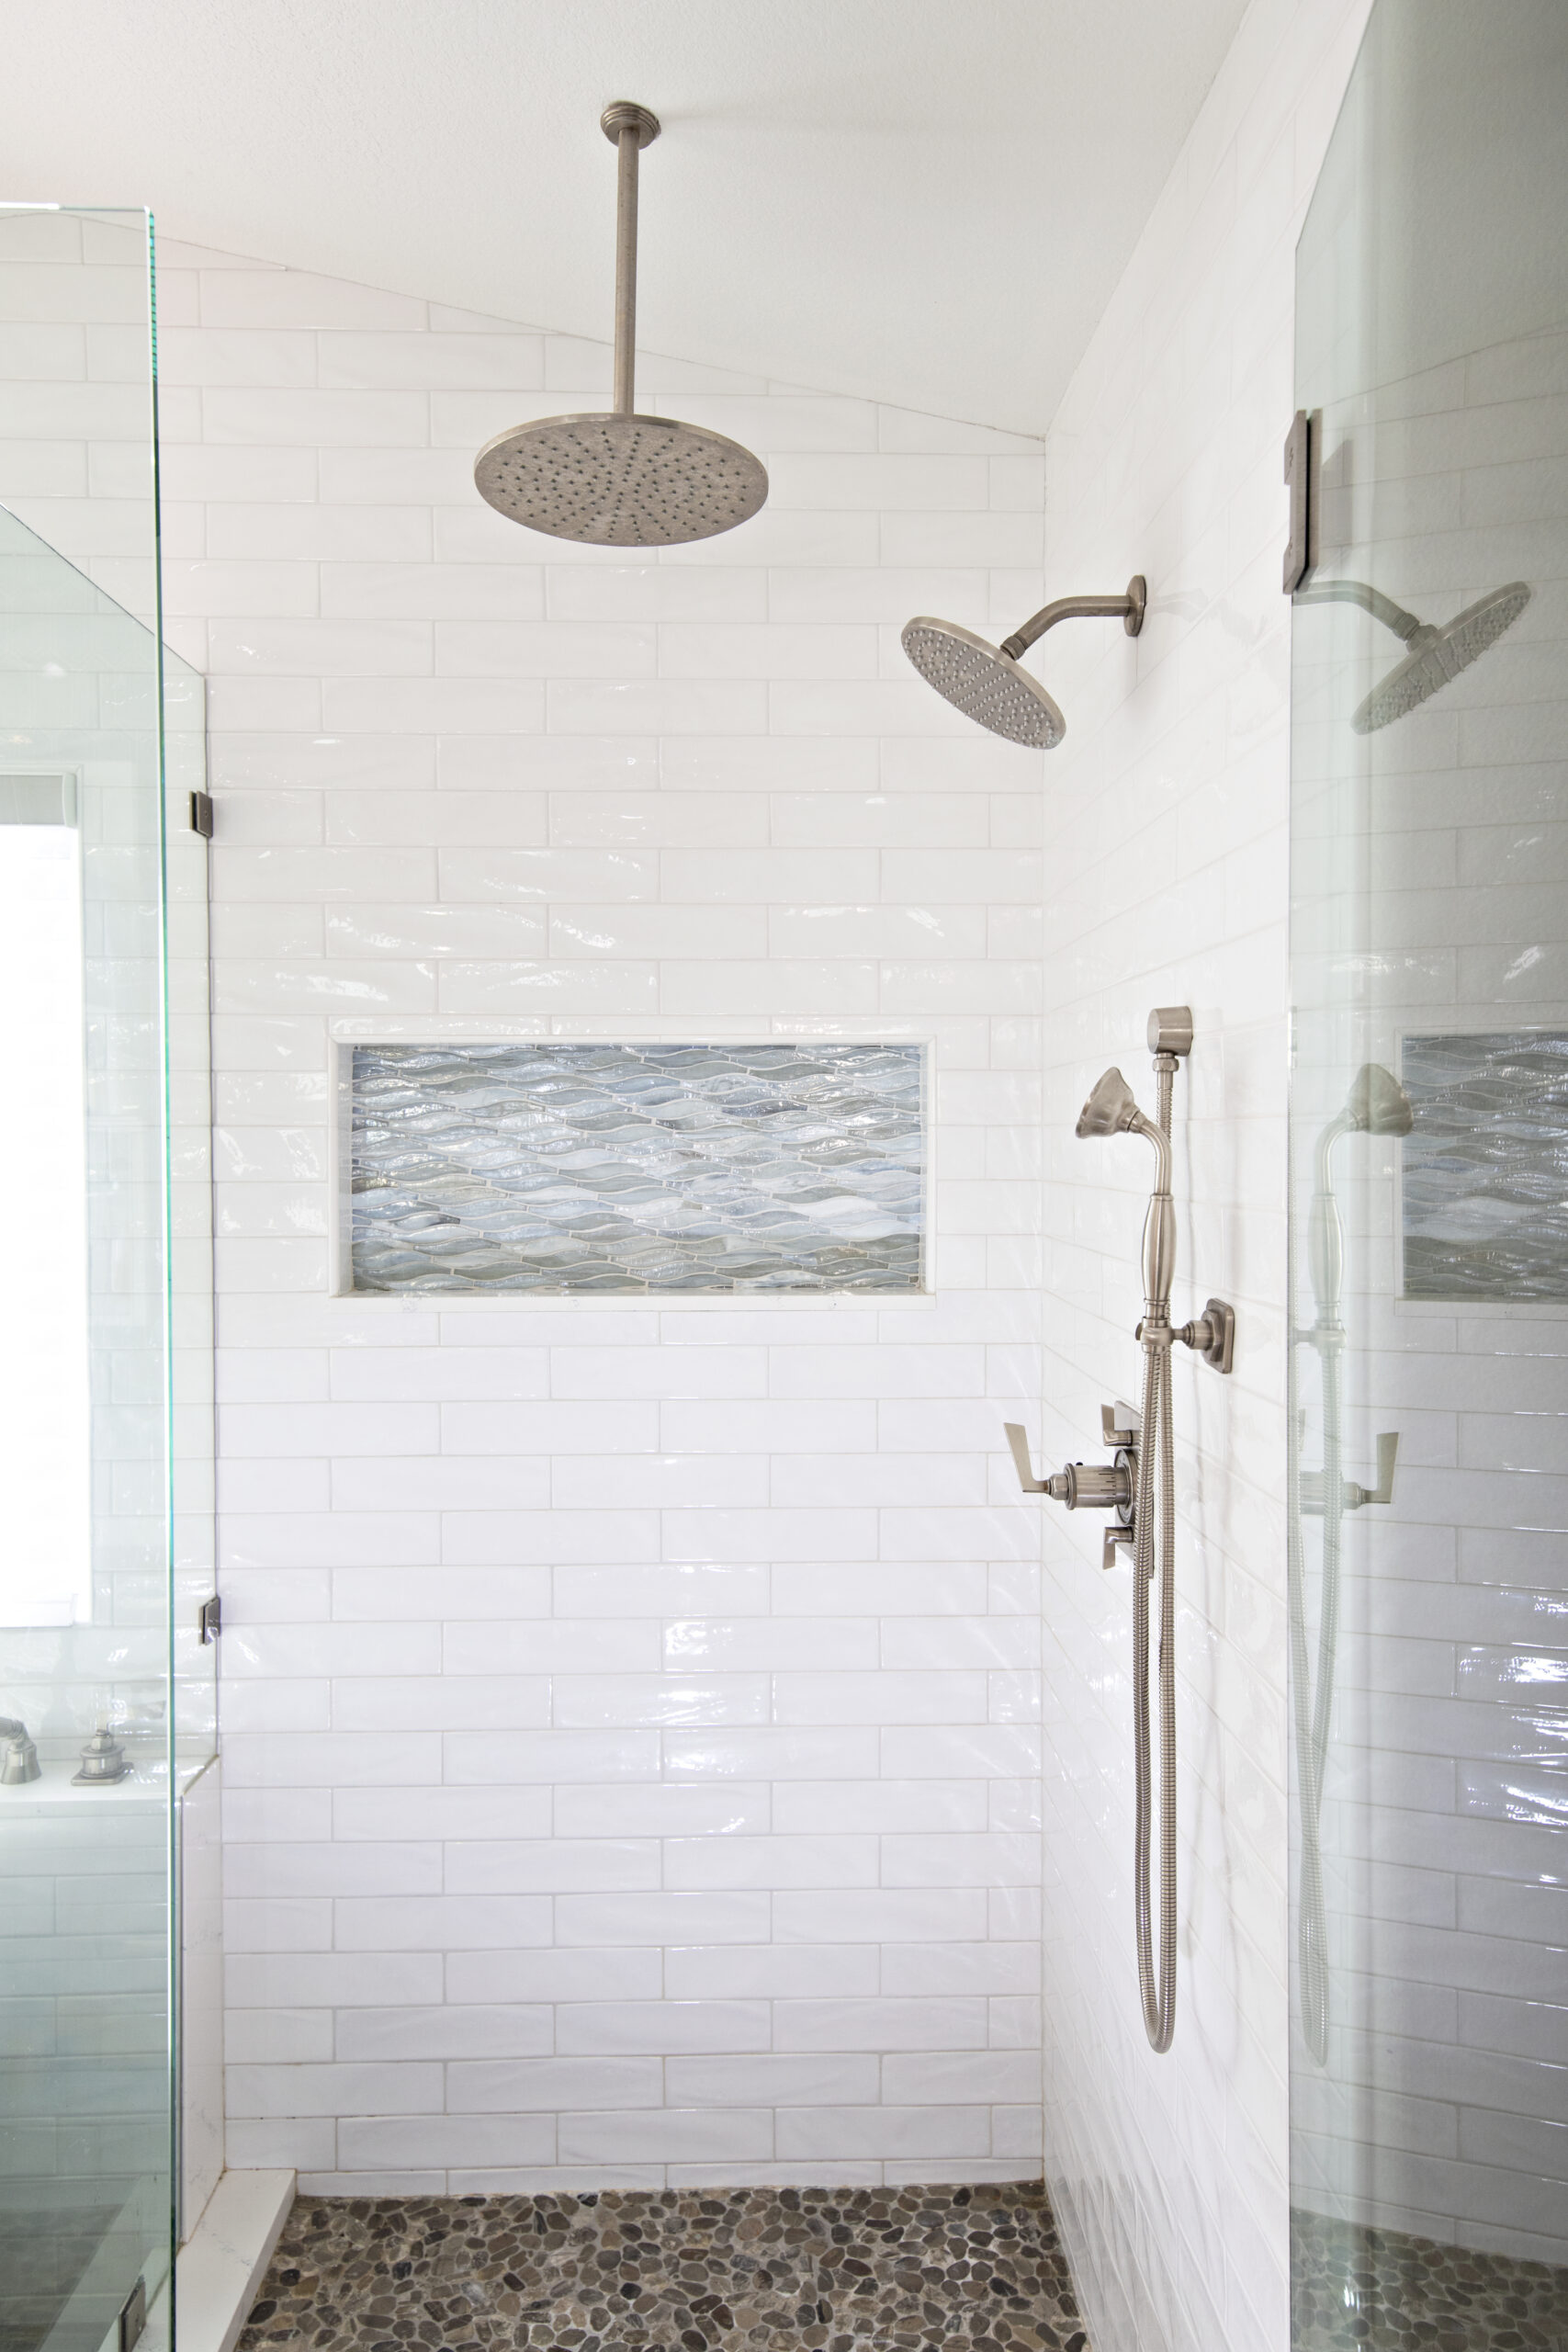 Extra large shower with a pop of color and texture in the shampoo niche